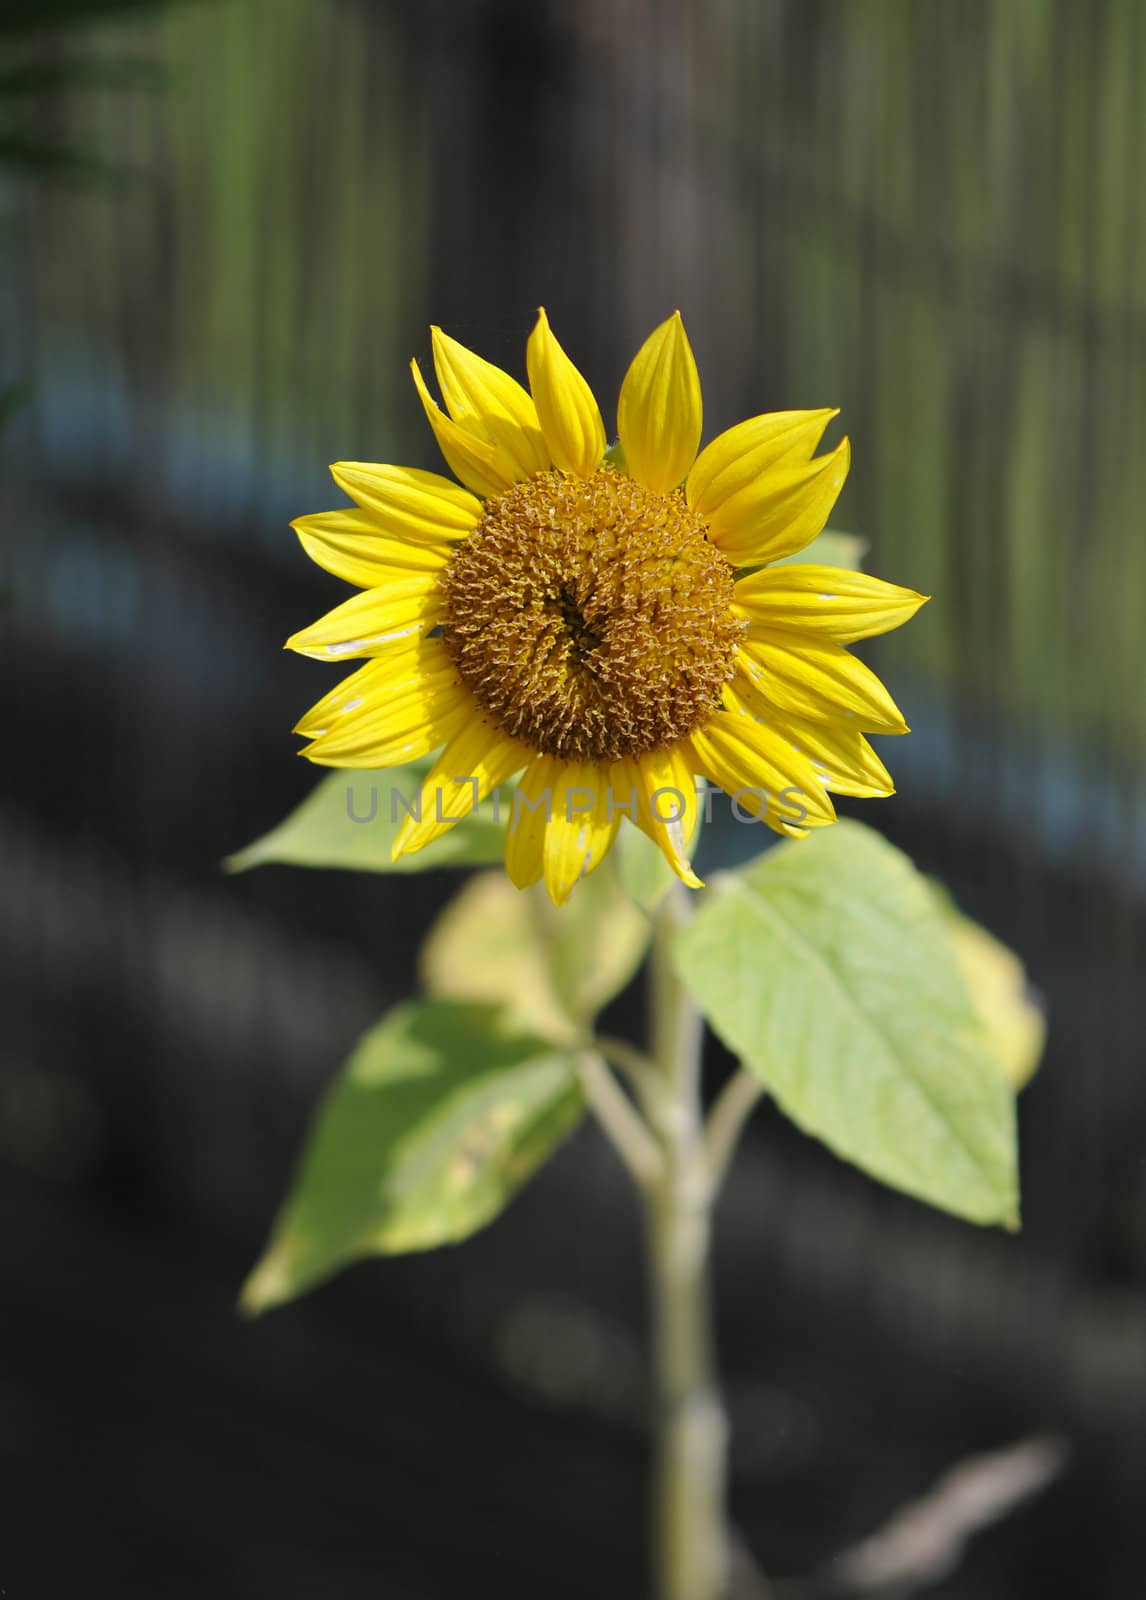 Opened sunflower in a garden with a blurred background